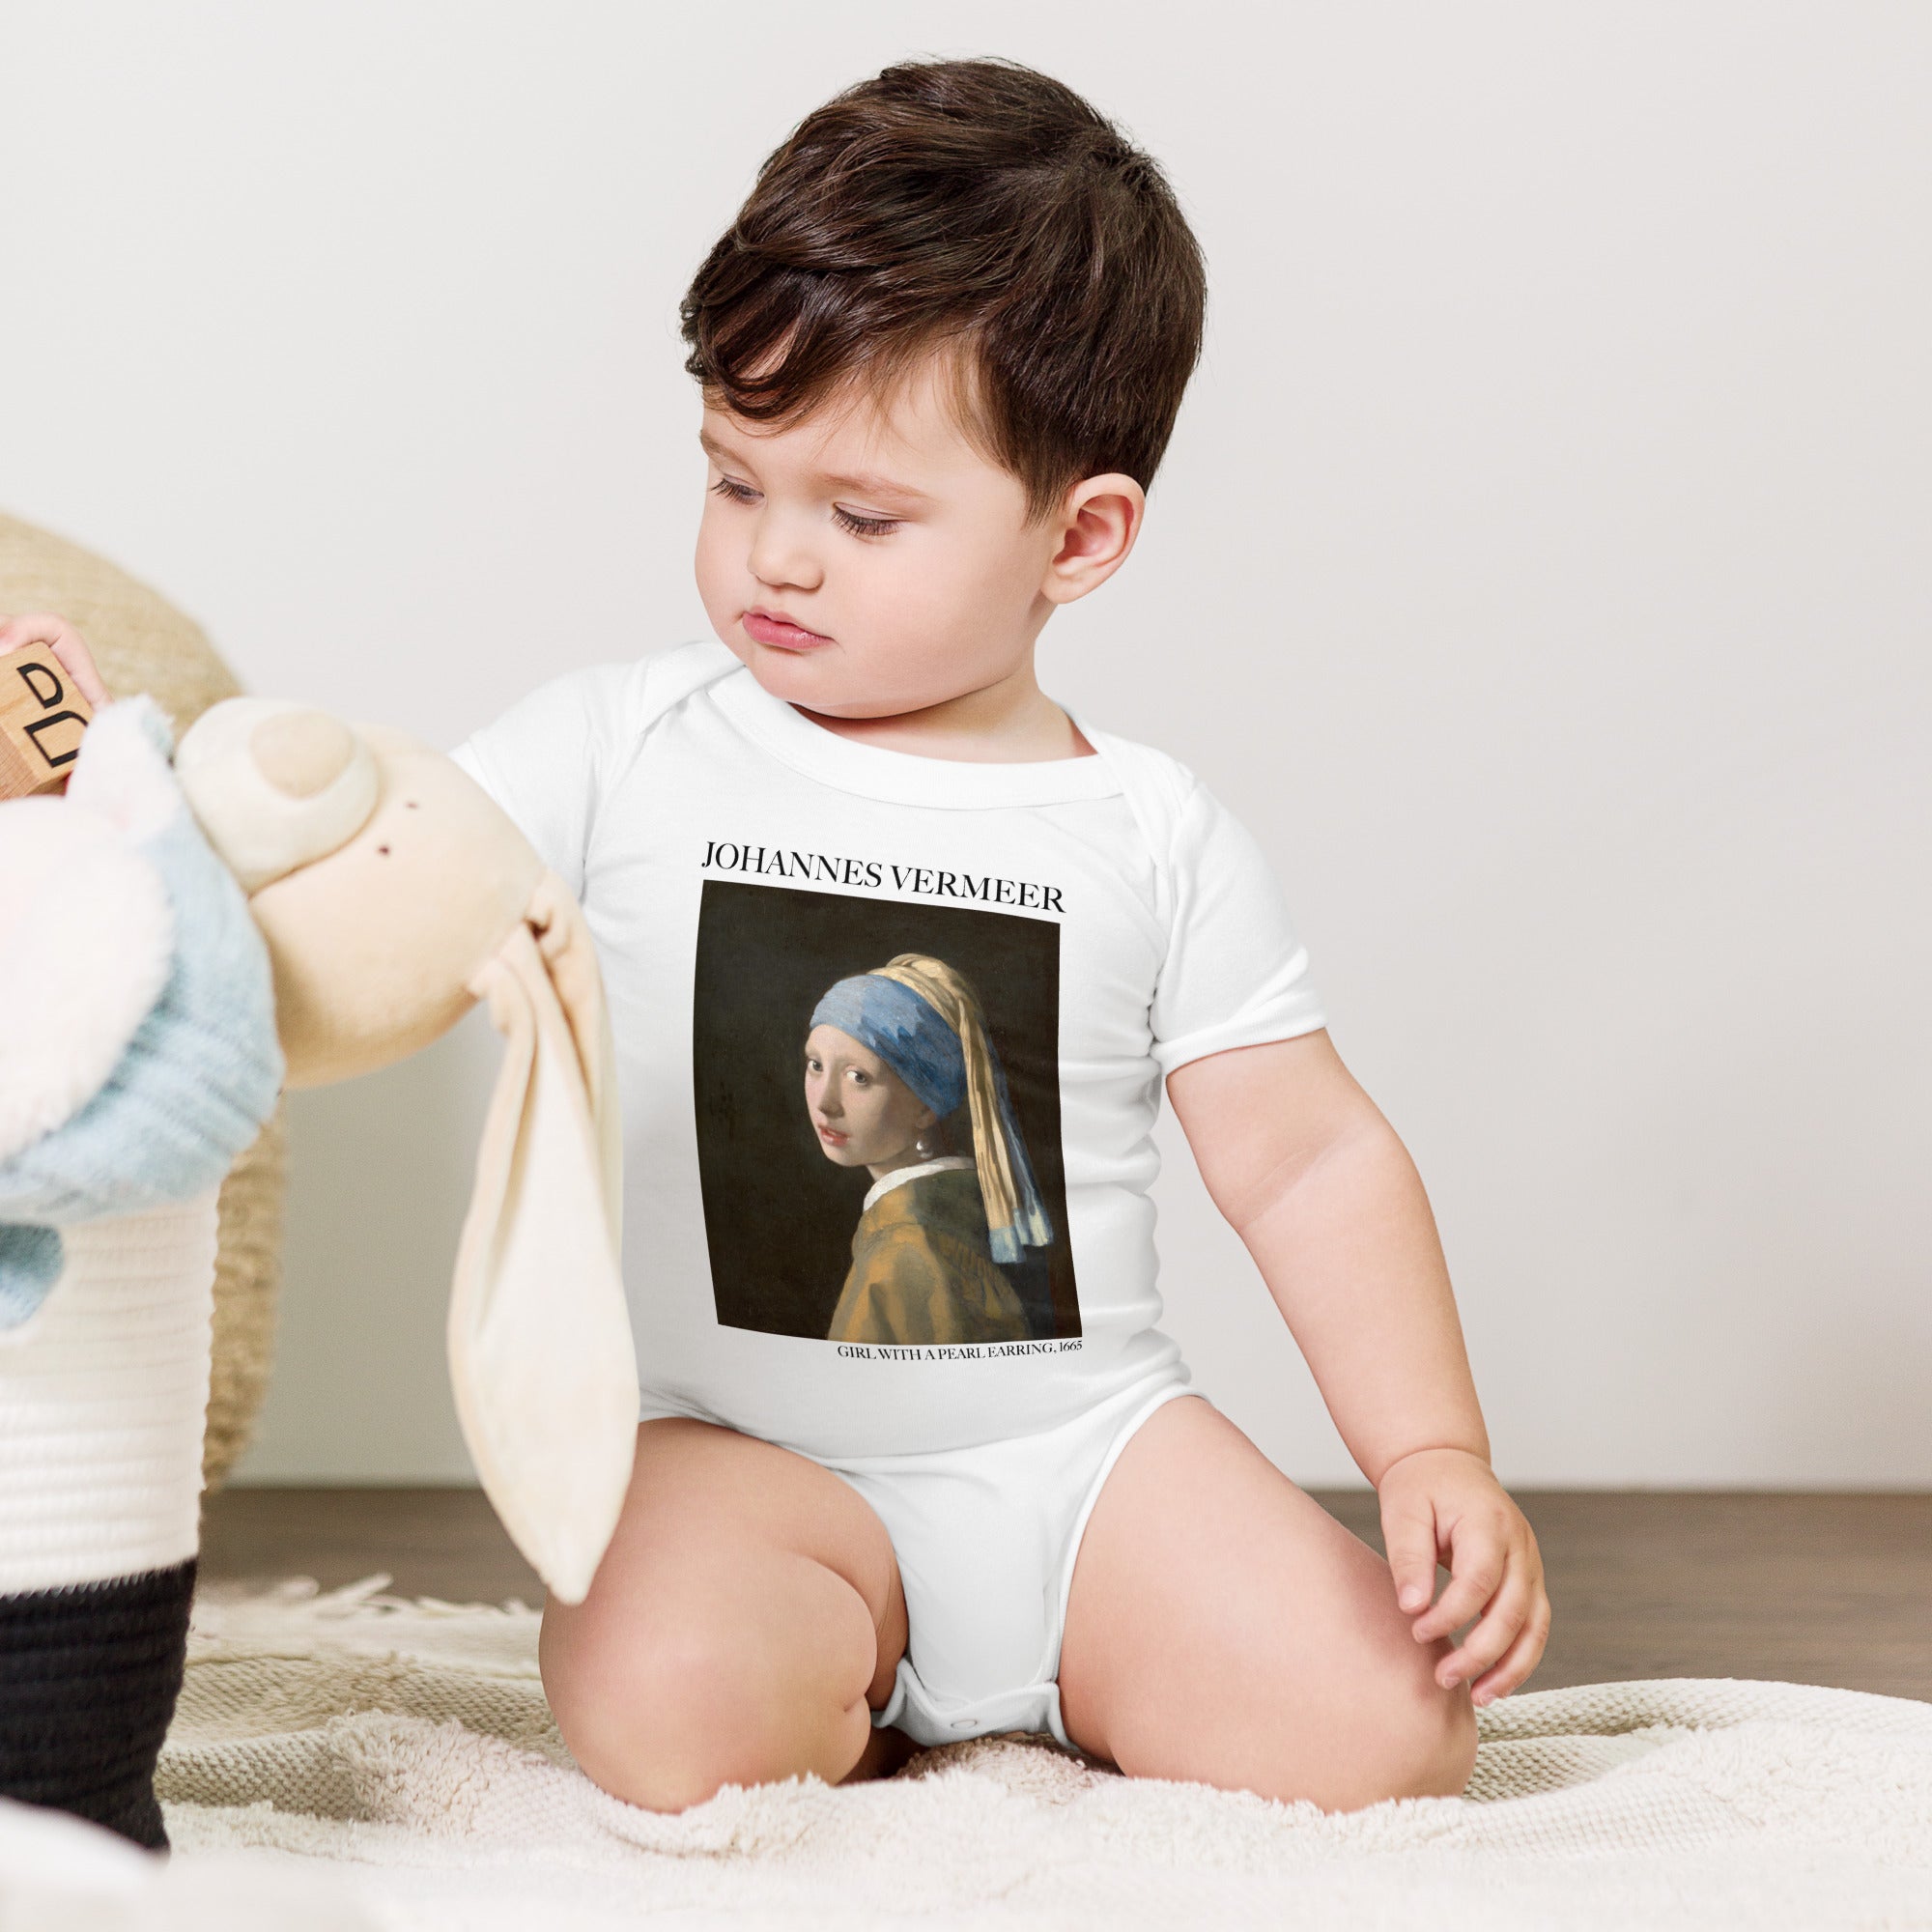 Johannes Vermeer 'Girl with a Pearl Earring' Famous Painting Short Sleeve One Piece | Premium Baby Art One Sleeve